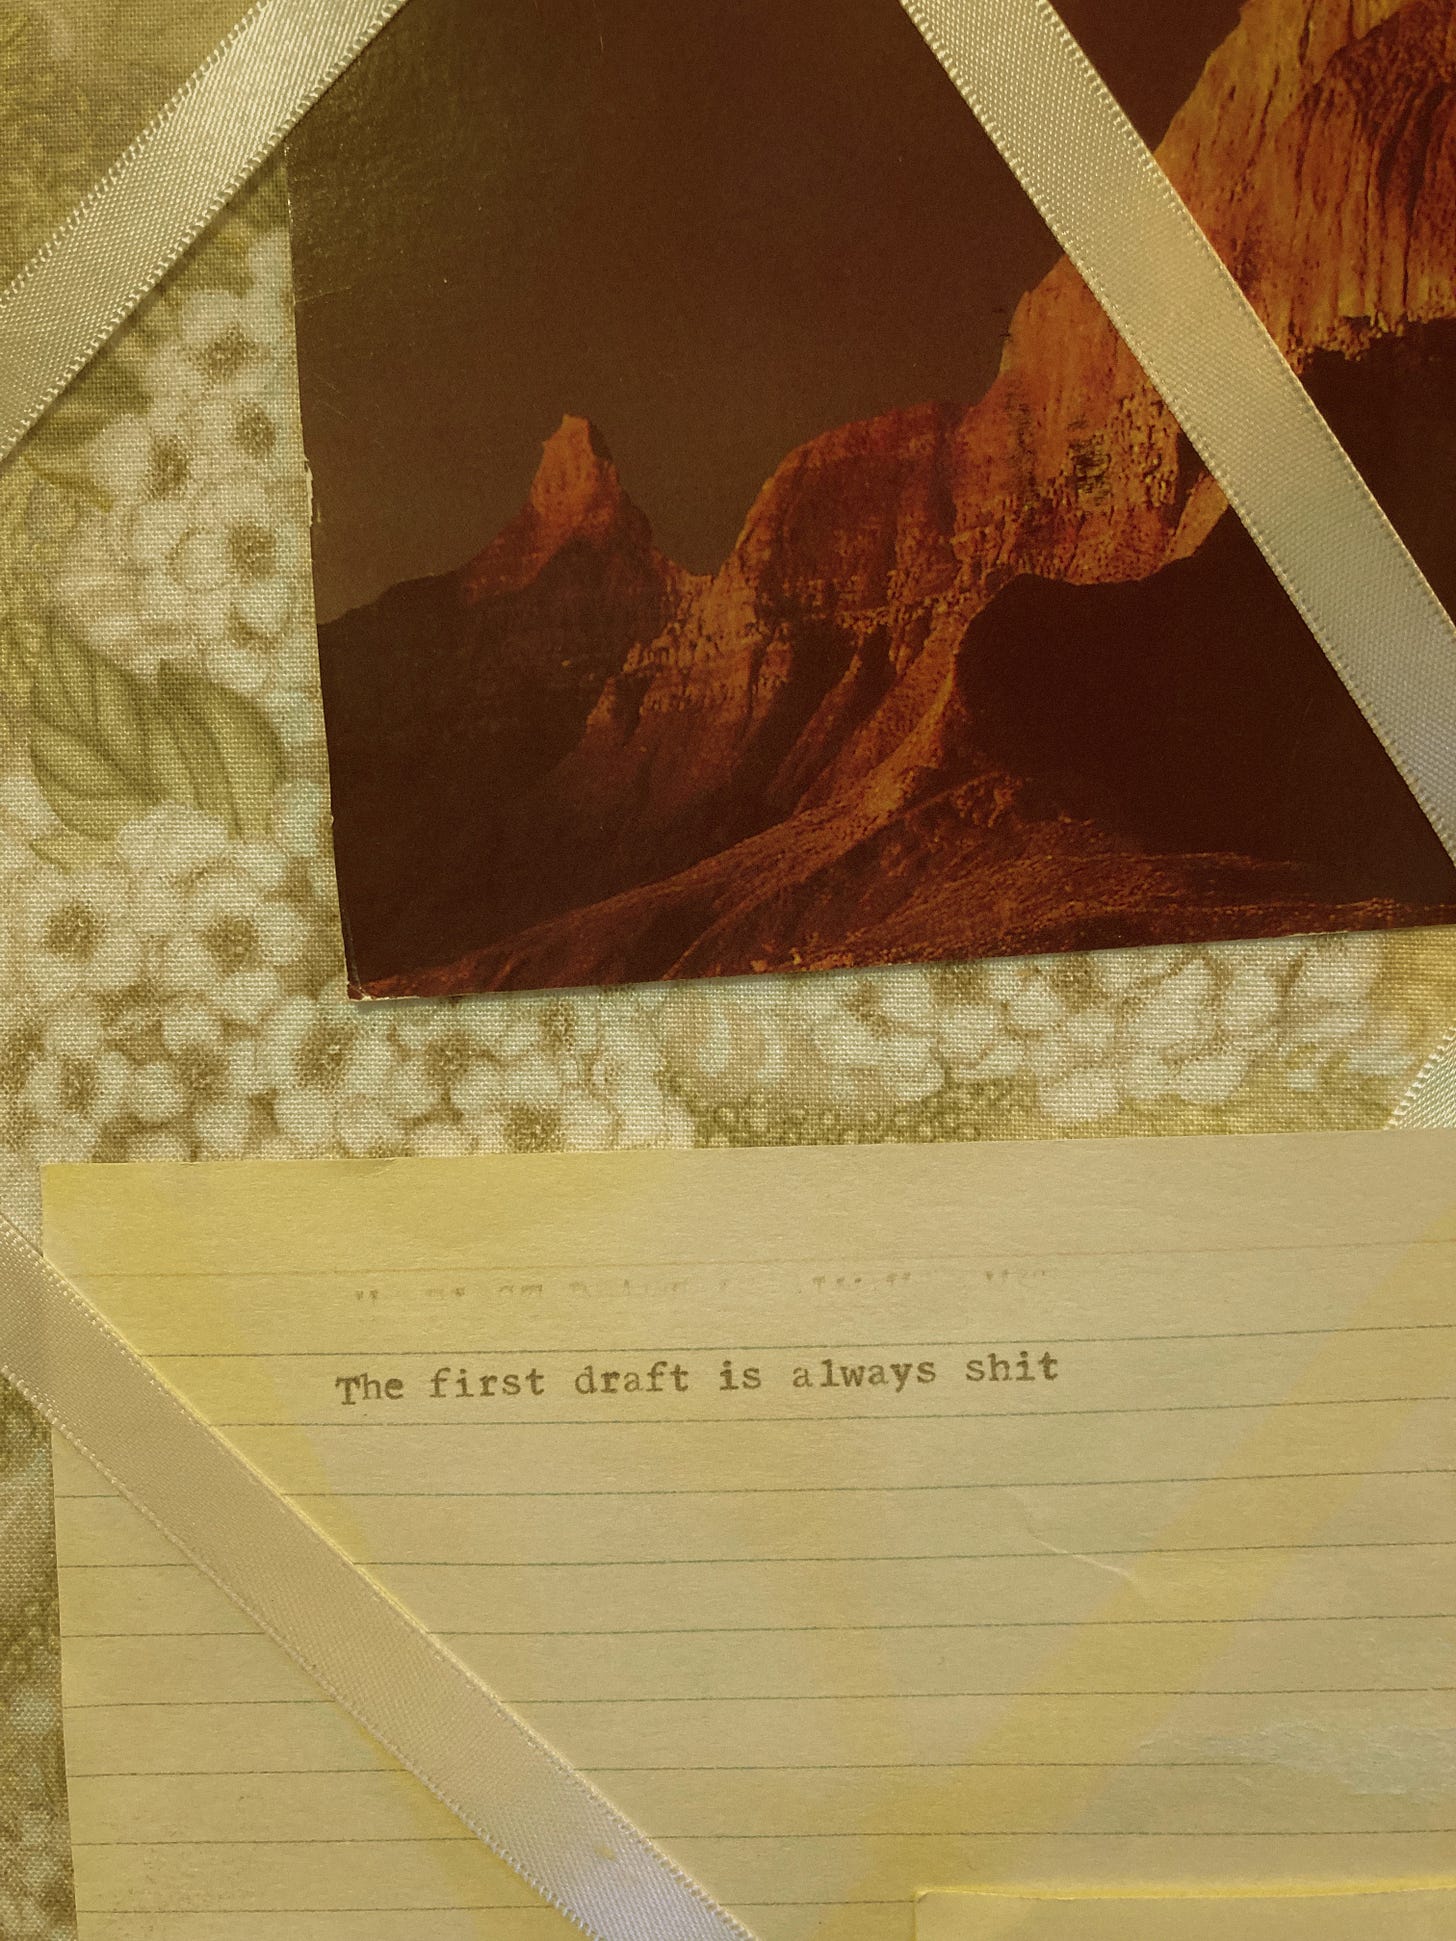 A postcard with bluffs and an index card with "the first draft is always shit" written on it